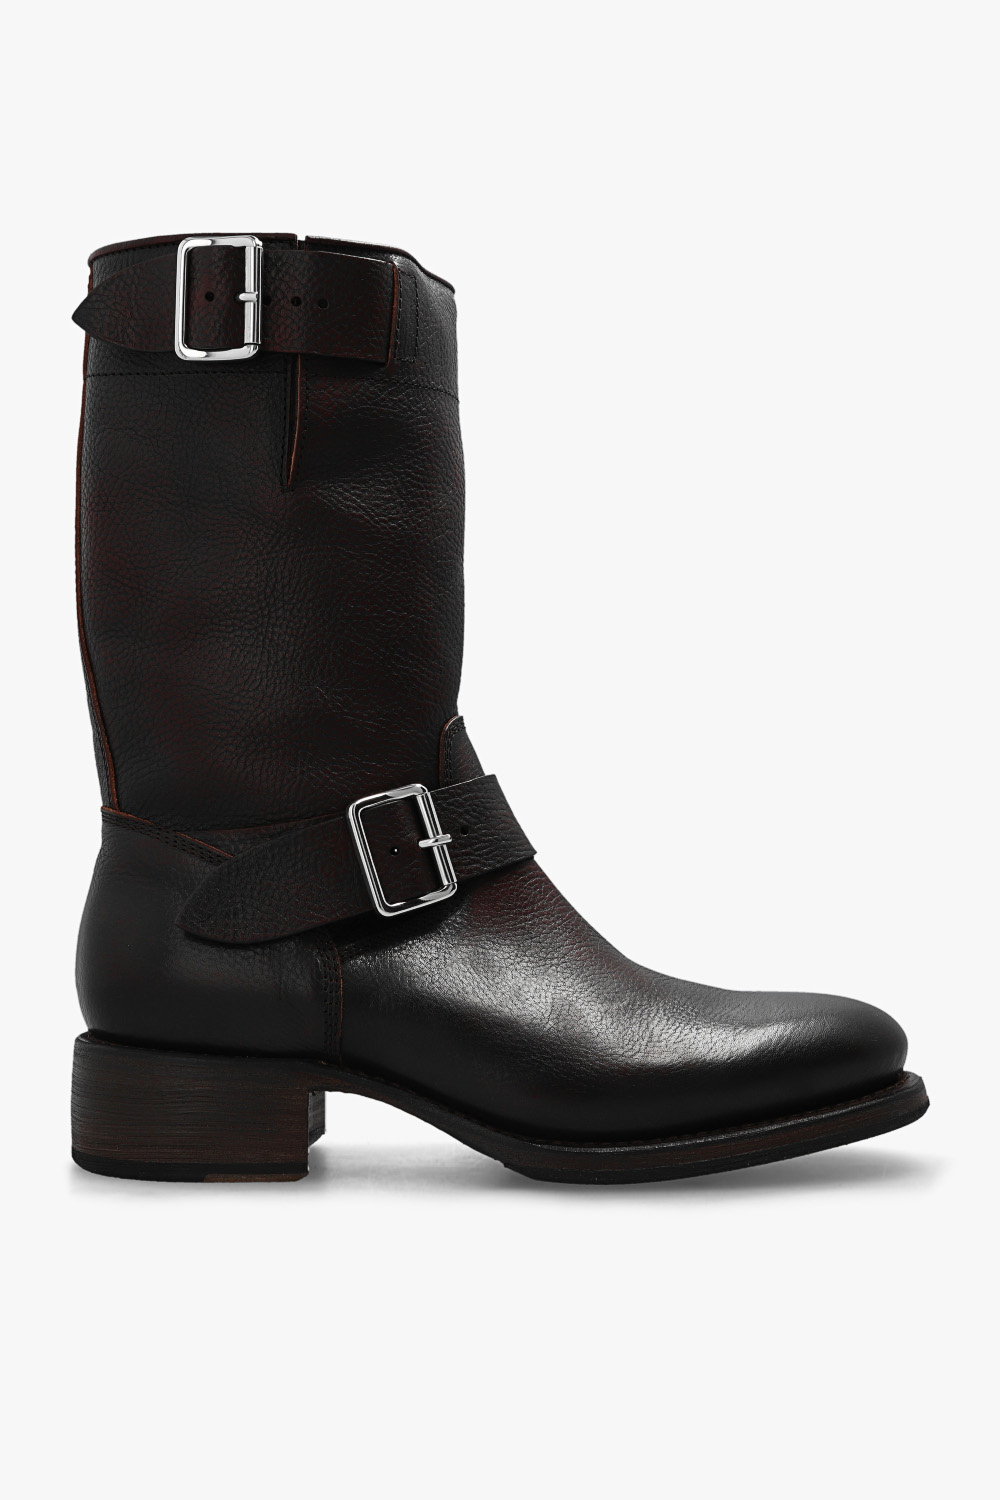 Dsquared2 ‘Harley’ leather boots